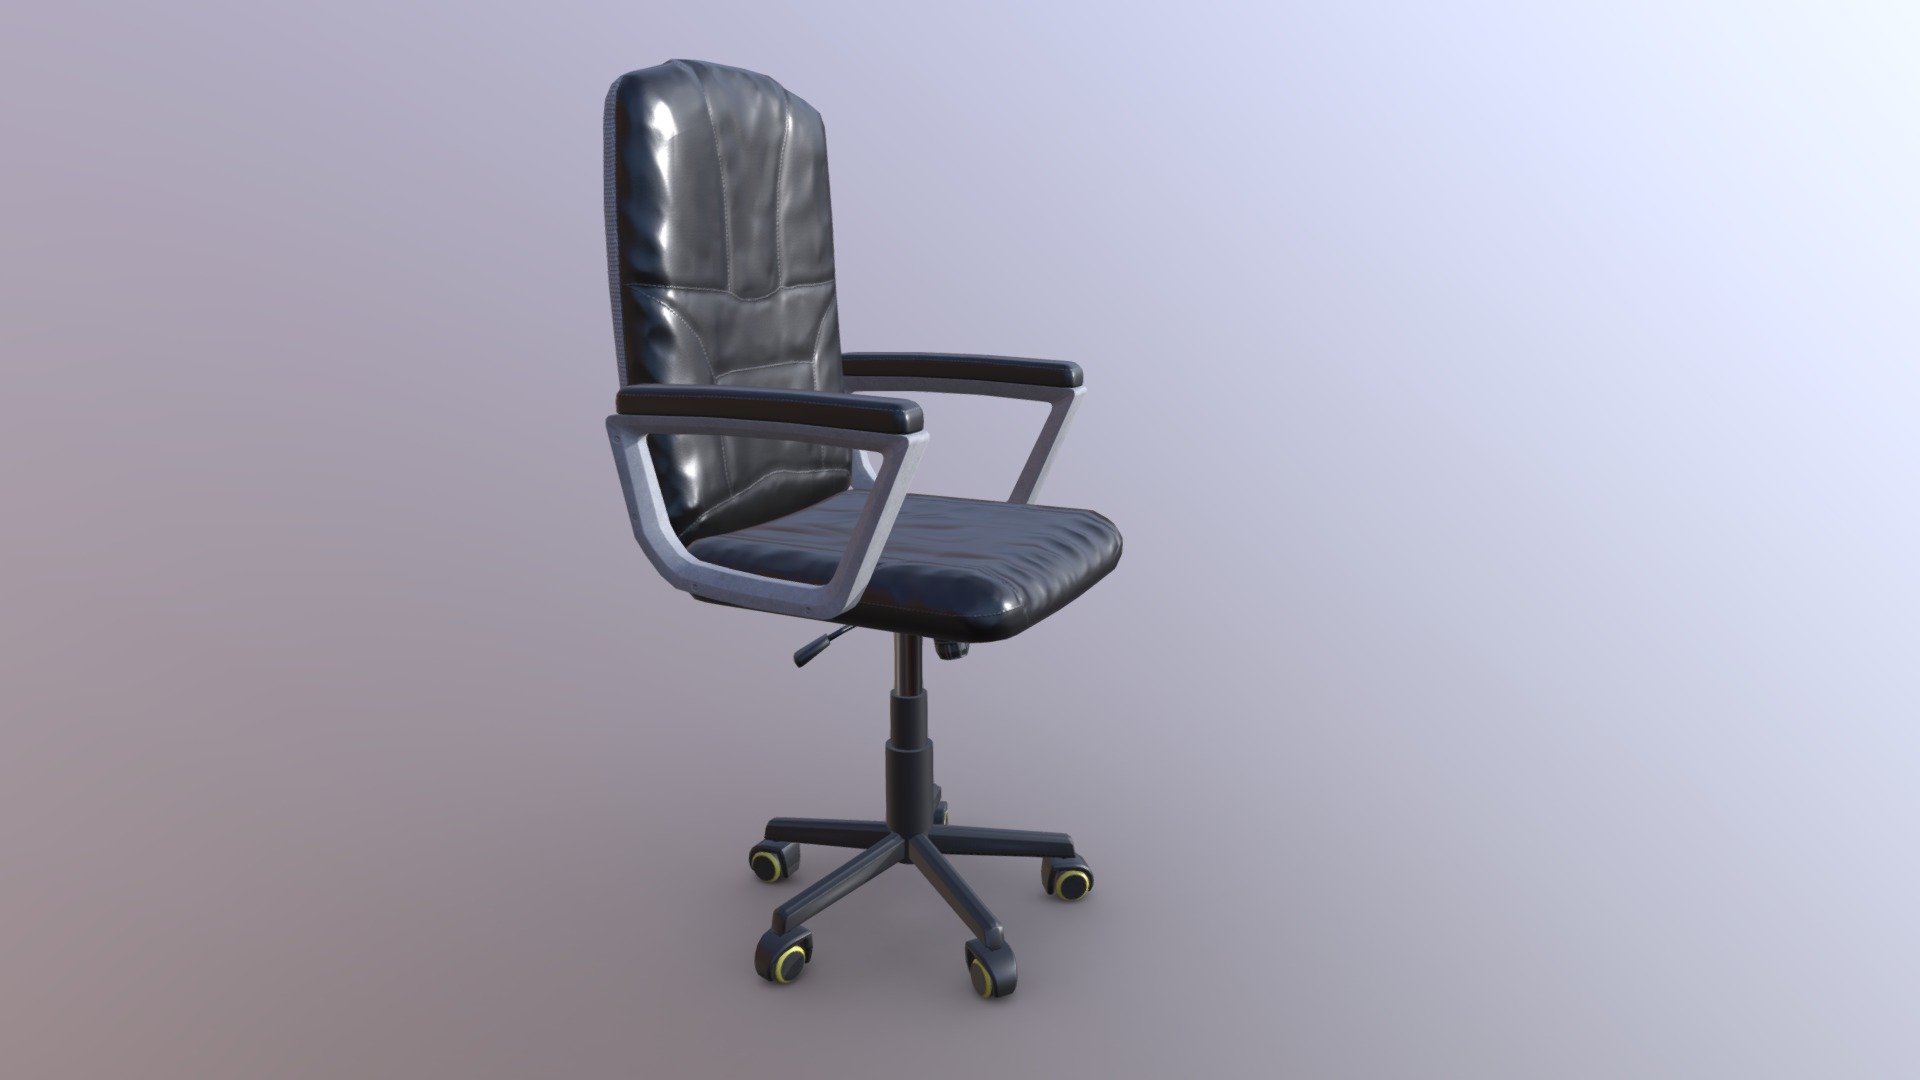 Avaible textures in archive: PBR, Unreal Engine, Unity sets. All textures 2048 resolution.

PBR textures - 


Chair_PBR_BaseColor.png (1.4 mb)
Chair_PBR_Height.png (1.3 mb)
Chair_PBR_Metallic.png (20,8 KB)----------------------------------------- total 10 mb.
Chair_PBR_Normal.png (6.2 mb)
Chair_PBR_Roughness.png (1.1 mb)

Unreal Engine textures -


Chair_Unreal_BaseColor.png (1.4 mb)
Chair_Unreal_Normal.png (6.2 mb) -------------------------------------- total 9.6 mb. 
Chair_Unreal_OcclusionRoughnessMetallic.png (2 mb)

Unity textures -


Chair_Unity_AlbedoTransparency.png (1.4 mb)
Chair_Unity_MetallicSmoothness.png (1.1 mb) --------------------- total  8.7 mb.
Chair_Unity_Normal.png (6.2 mb)
 - Office (home) black chair 3d model